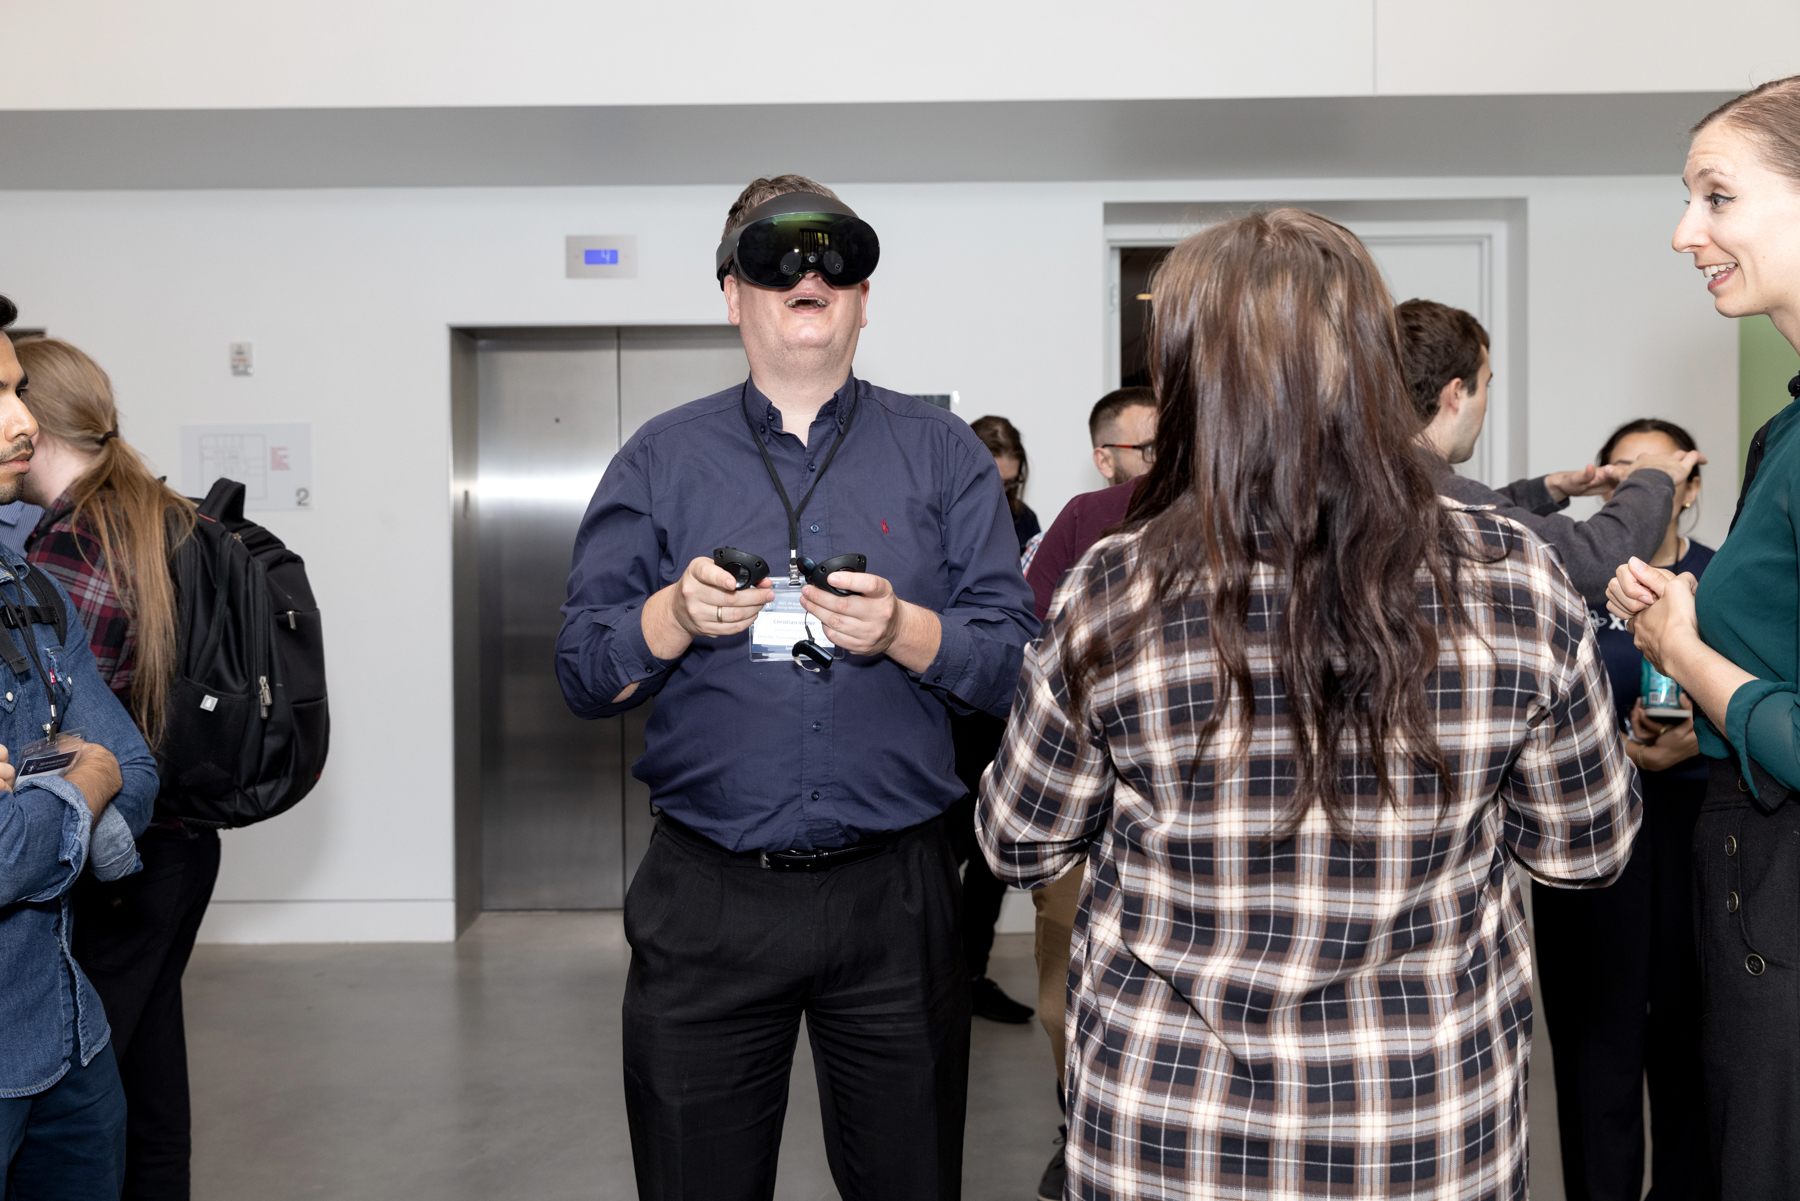 Man wears a VR headset and holds controllers, smiling widely